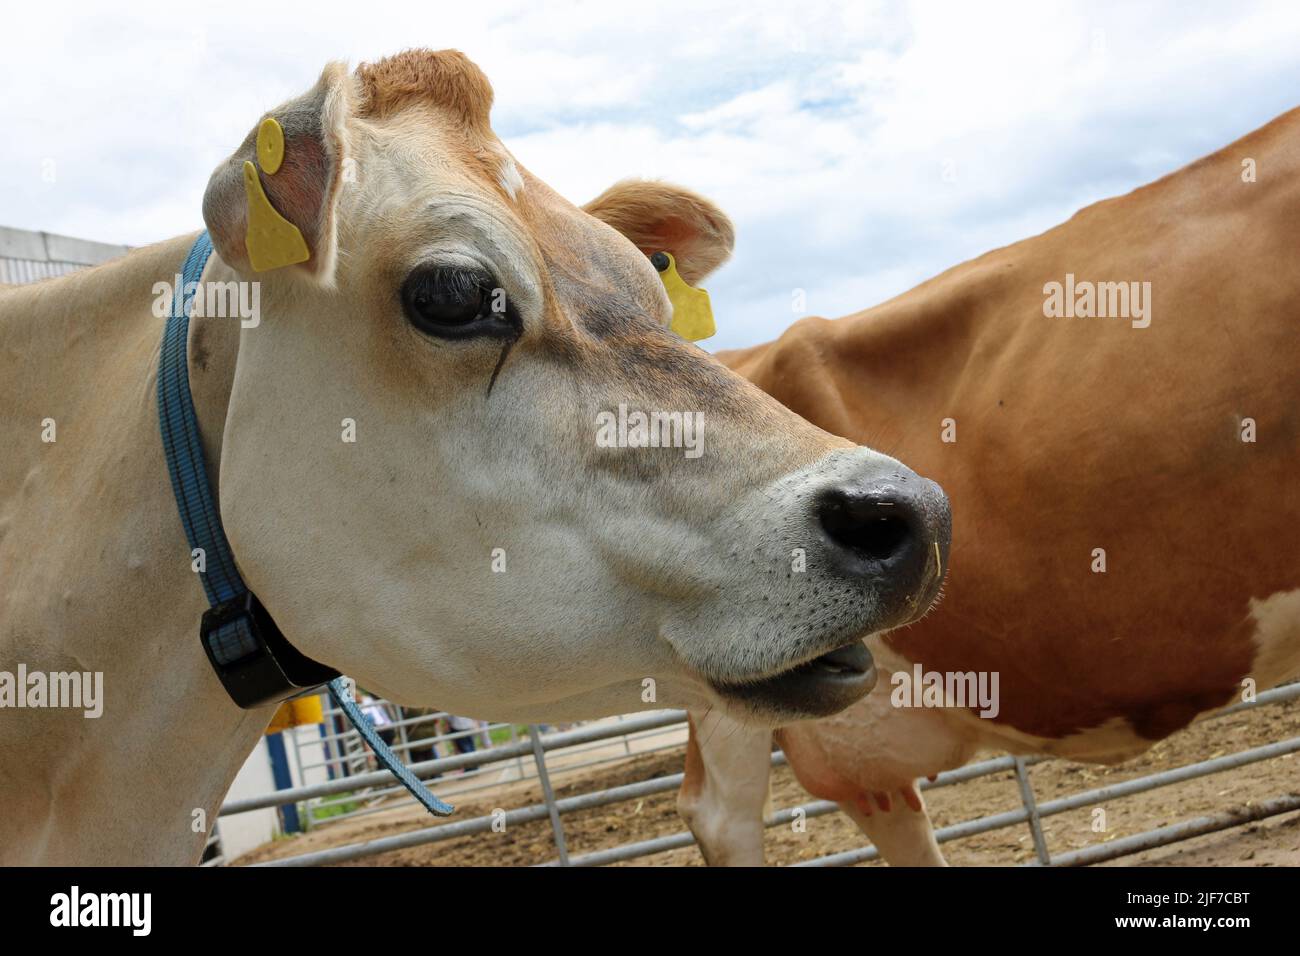 Light brown Guernsey cow head and shoulders in a farmyard with another cow, farm buildings and a metal fence blurred in the background. Stock Photo